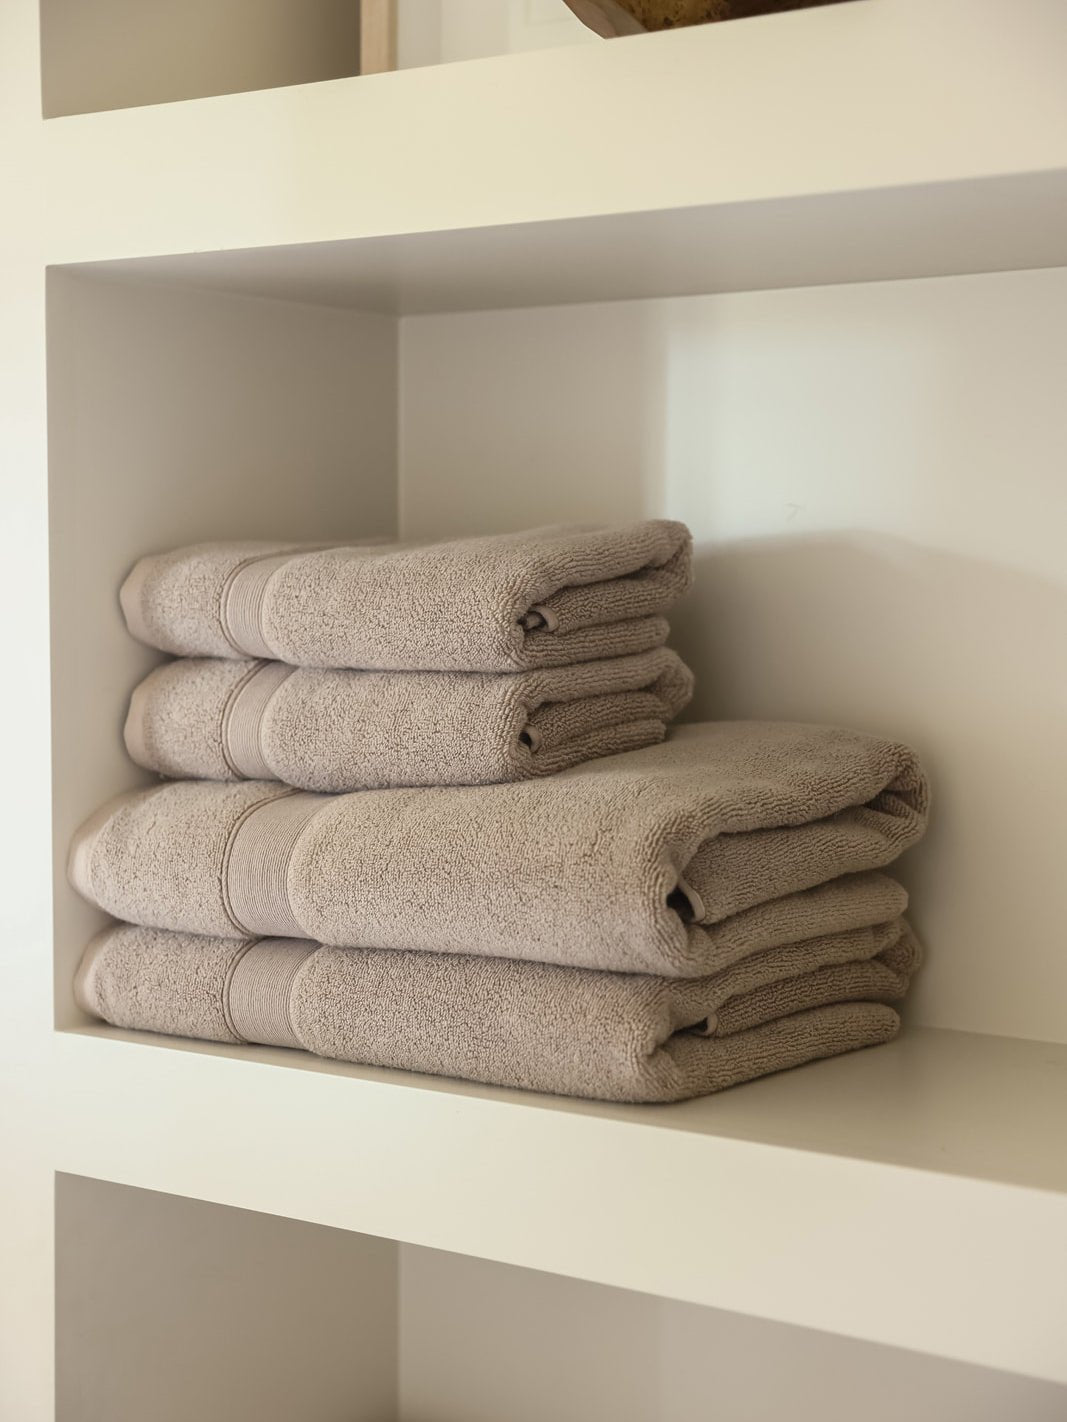 Sand luxe bath towels and hand towels folded on shelf 